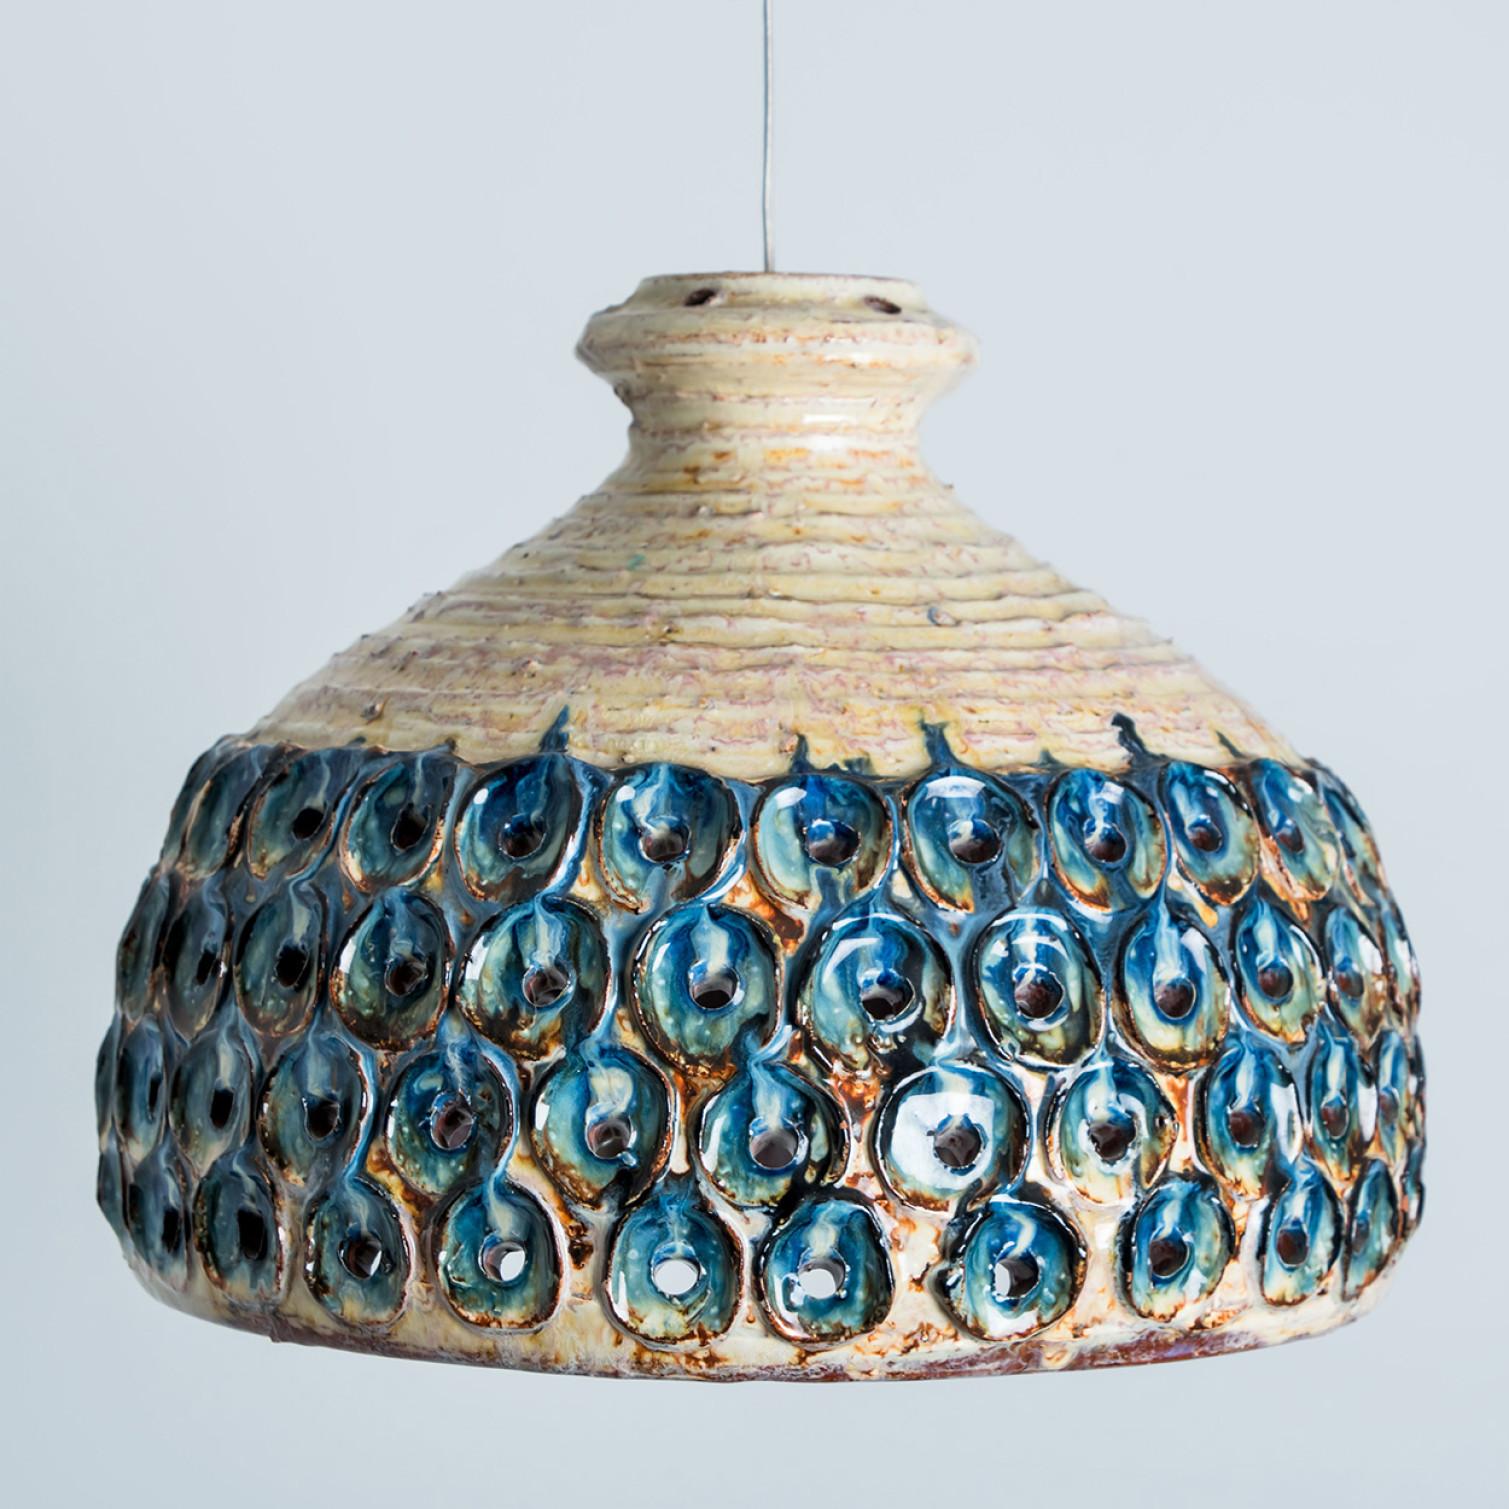 Stunning small round hanging lamp with a bowl-like shape, made with rich blue creme colored ceramics, manufactured in the 1970s in Denmark. We also have a multitude of unique colored ceramic light sets and arrangements, all available in the front